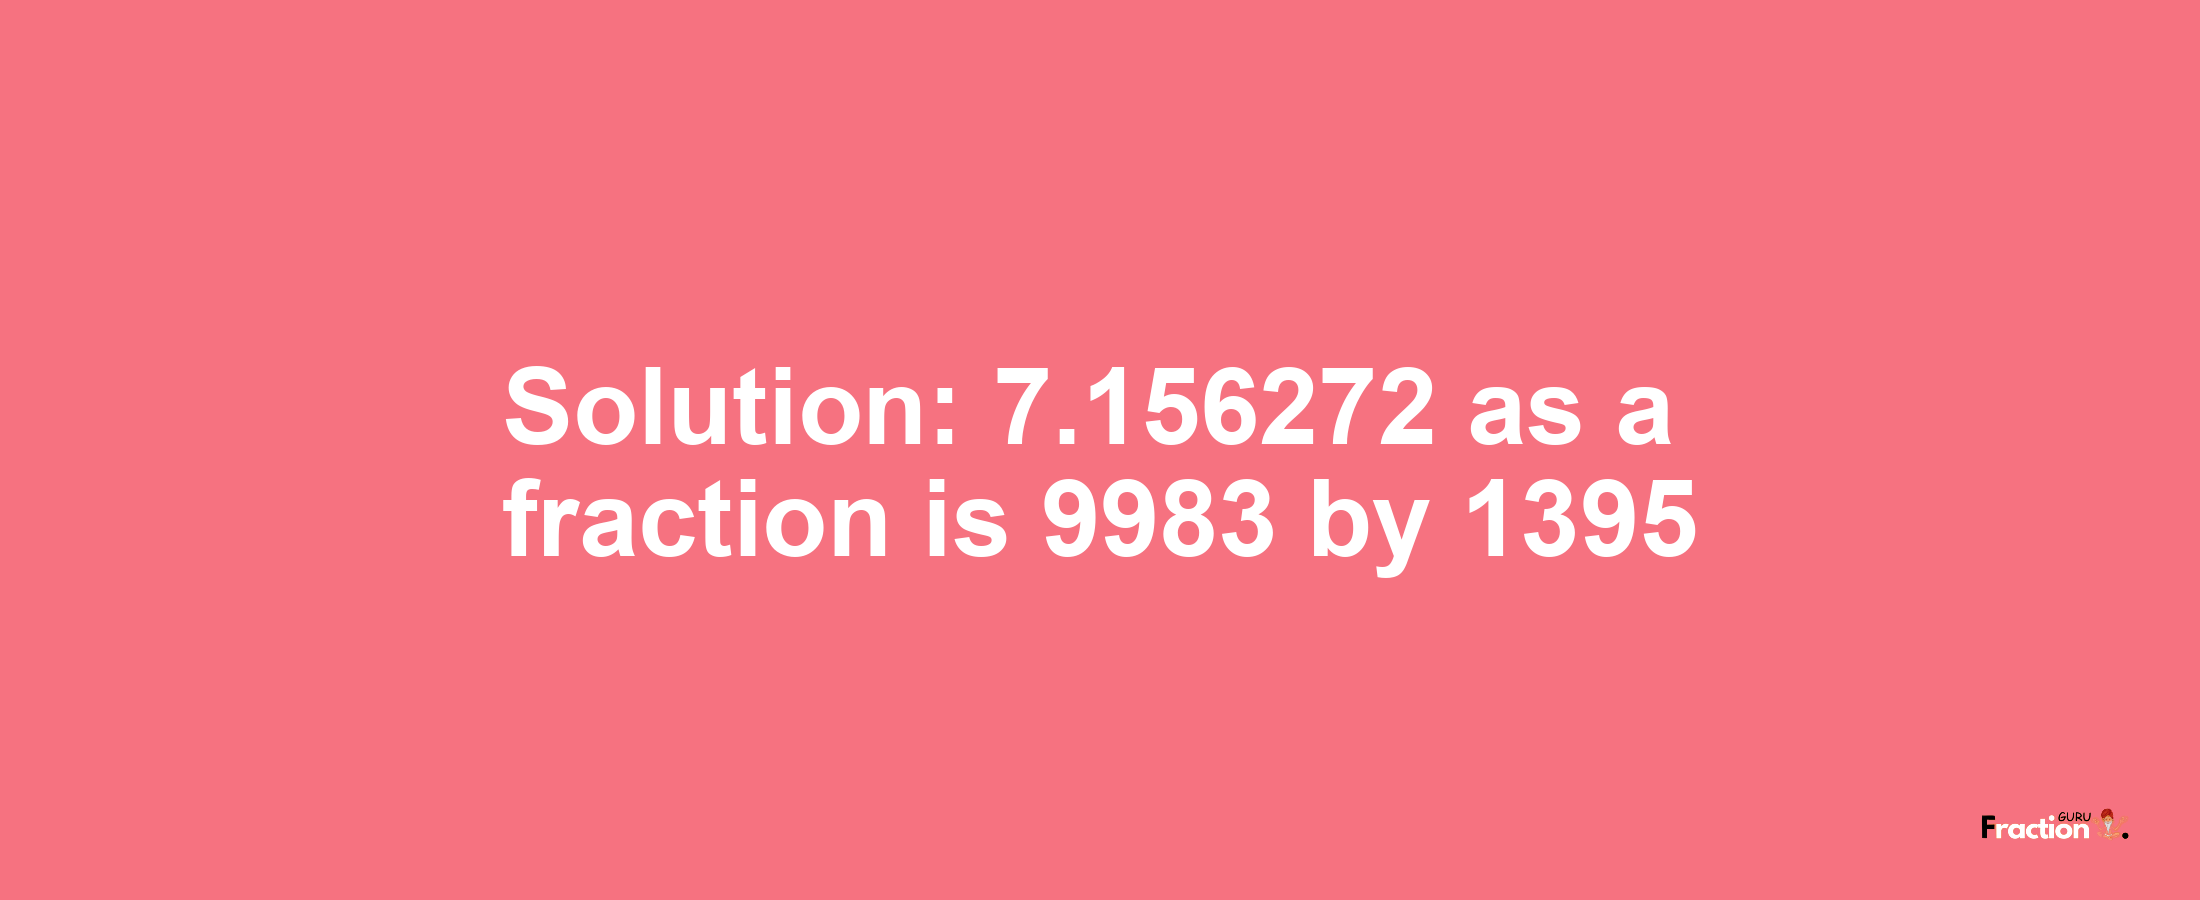 Solution:7.156272 as a fraction is 9983/1395